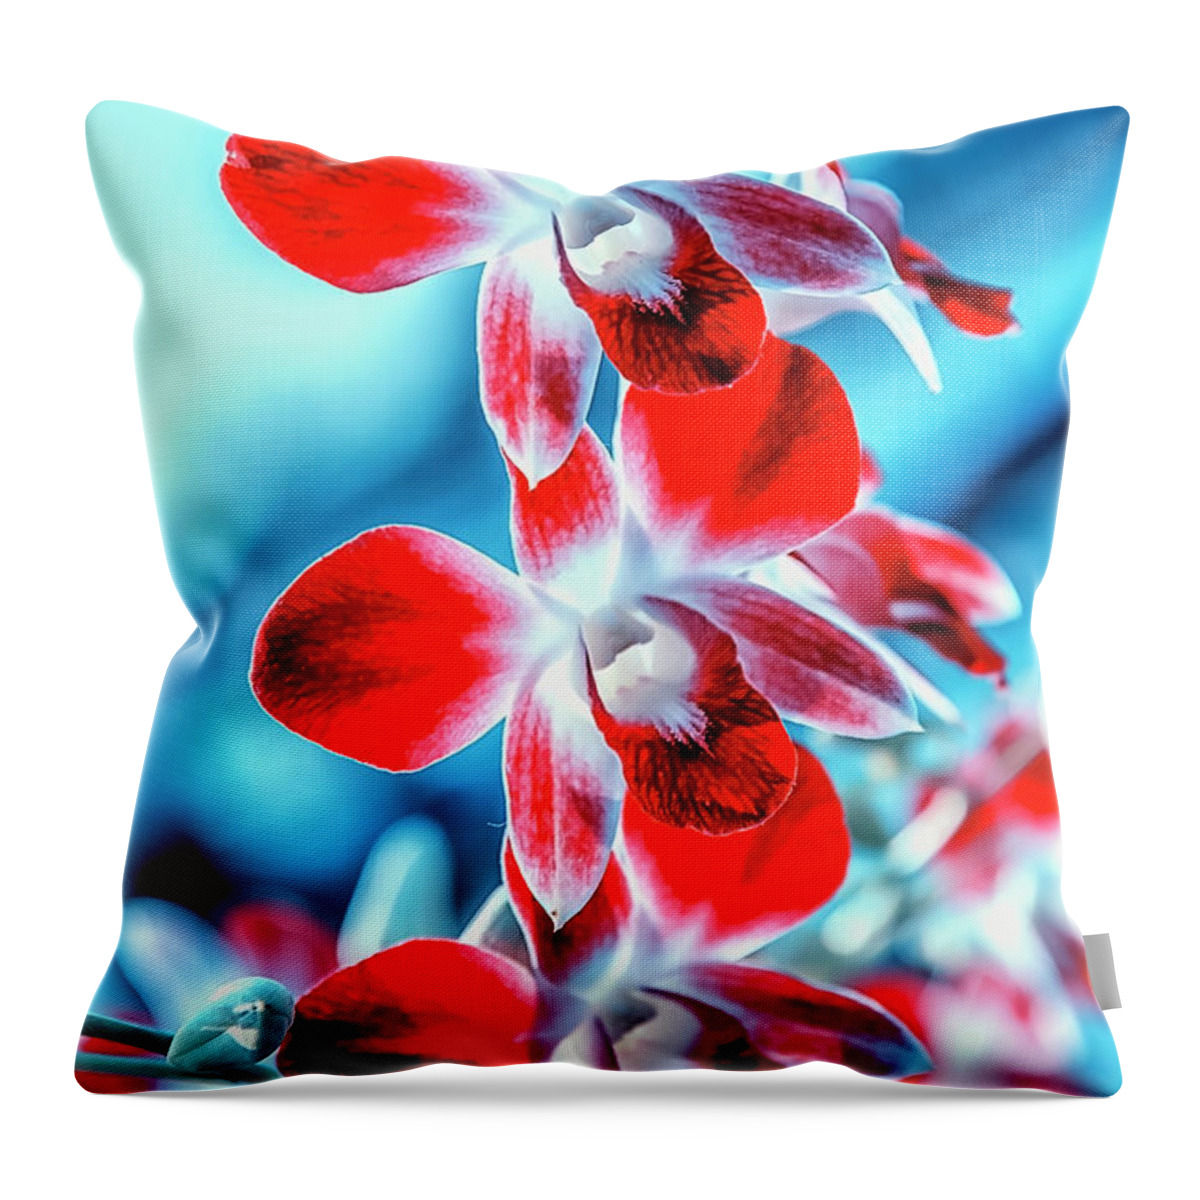 Background Throw Pillow featuring the photograph Colorful Flowers by Manjik Pictures